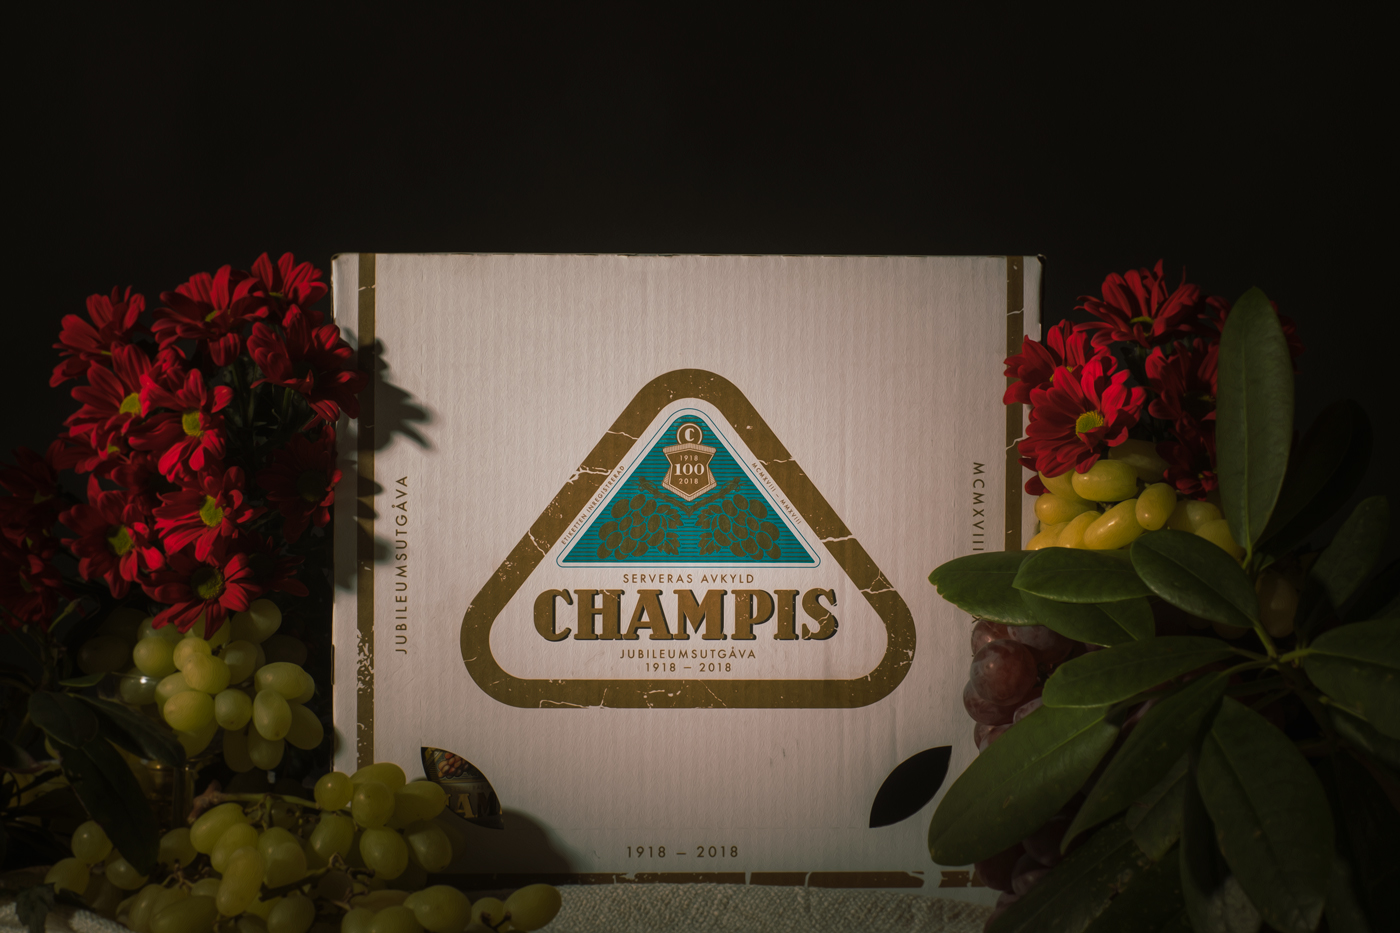 Champis bottle Packaging